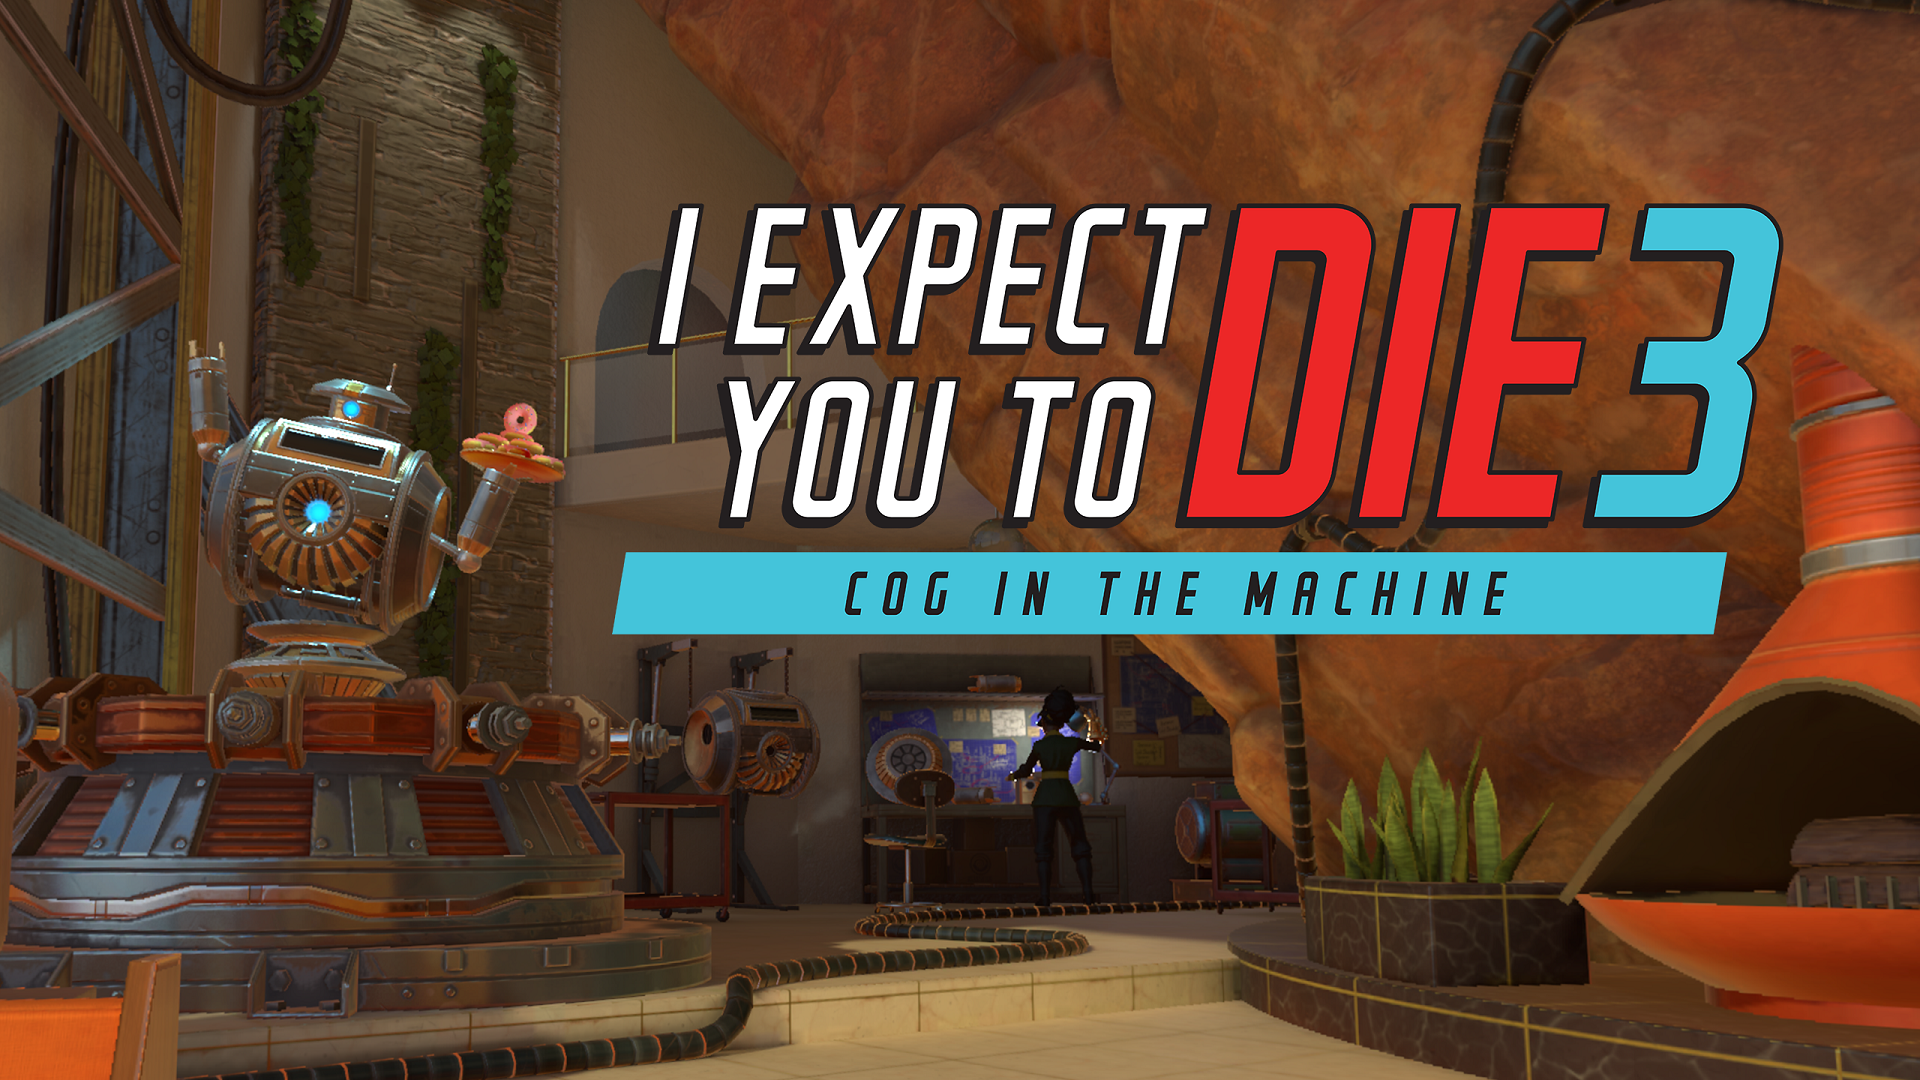 I Expect You To Die 3: Cog in the Machine I Expect You To Die 3 Cog in the Machine